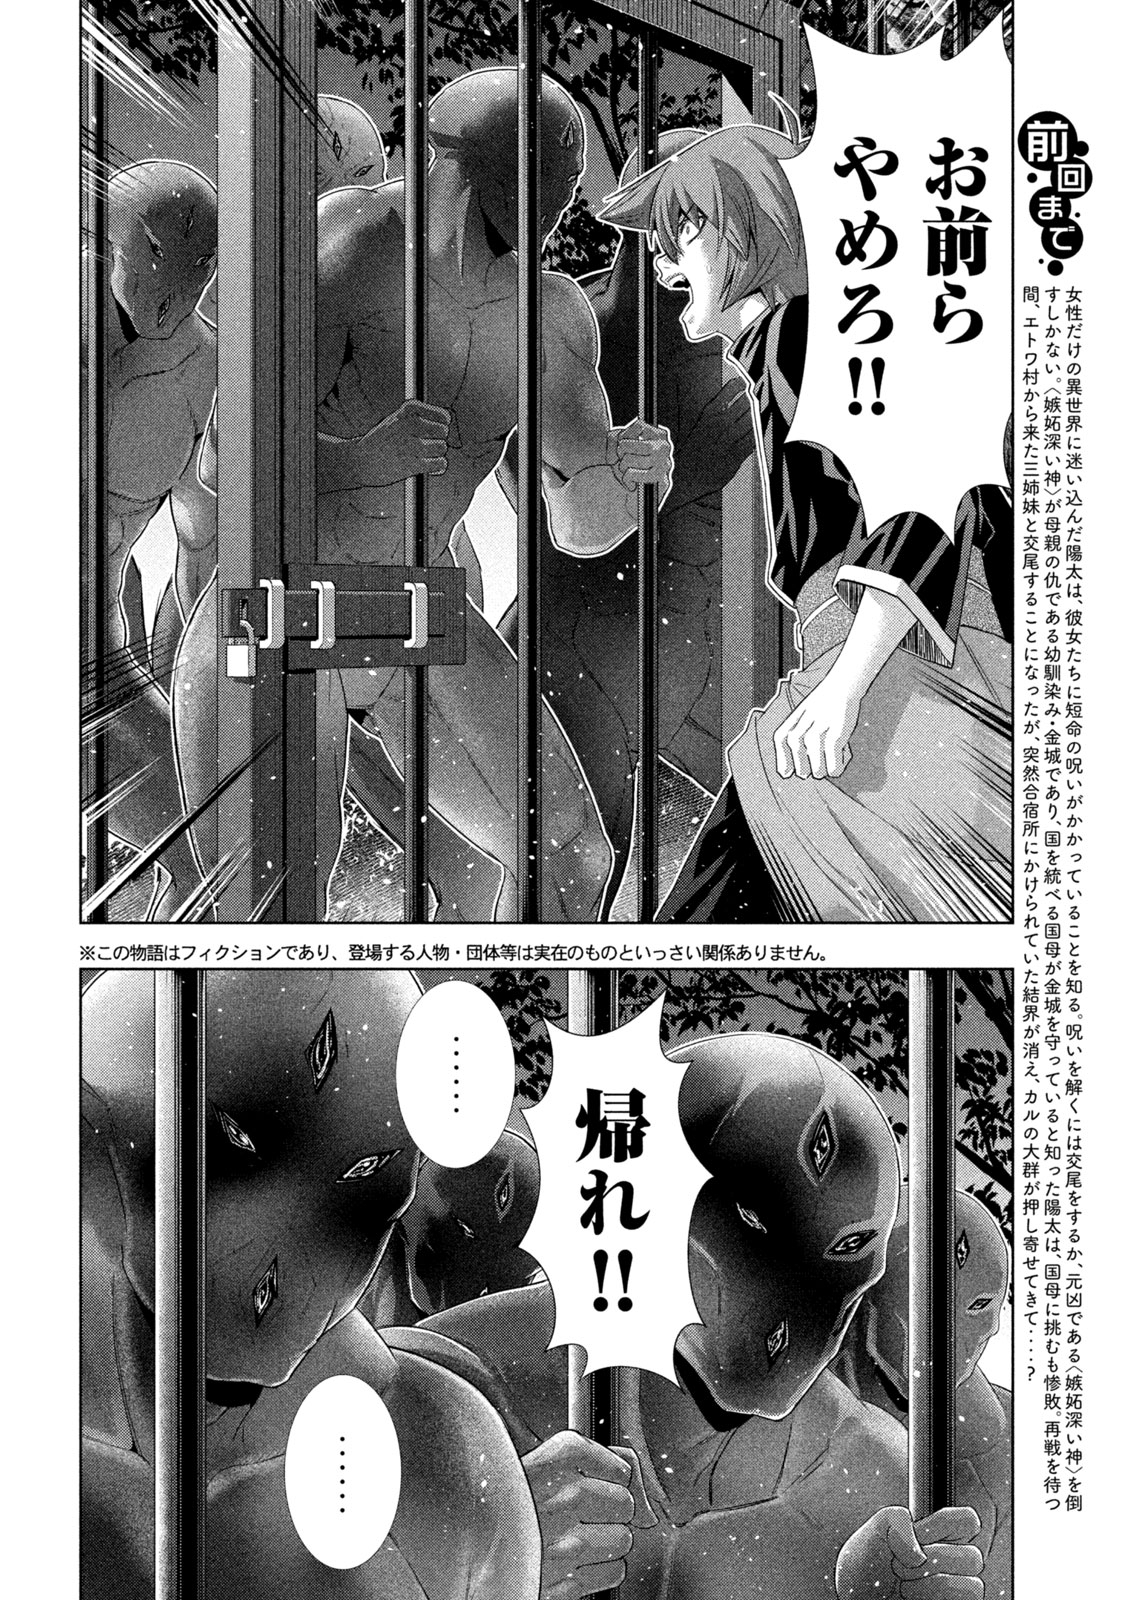 Parallel Paradise - Chapter 265 - Page 4